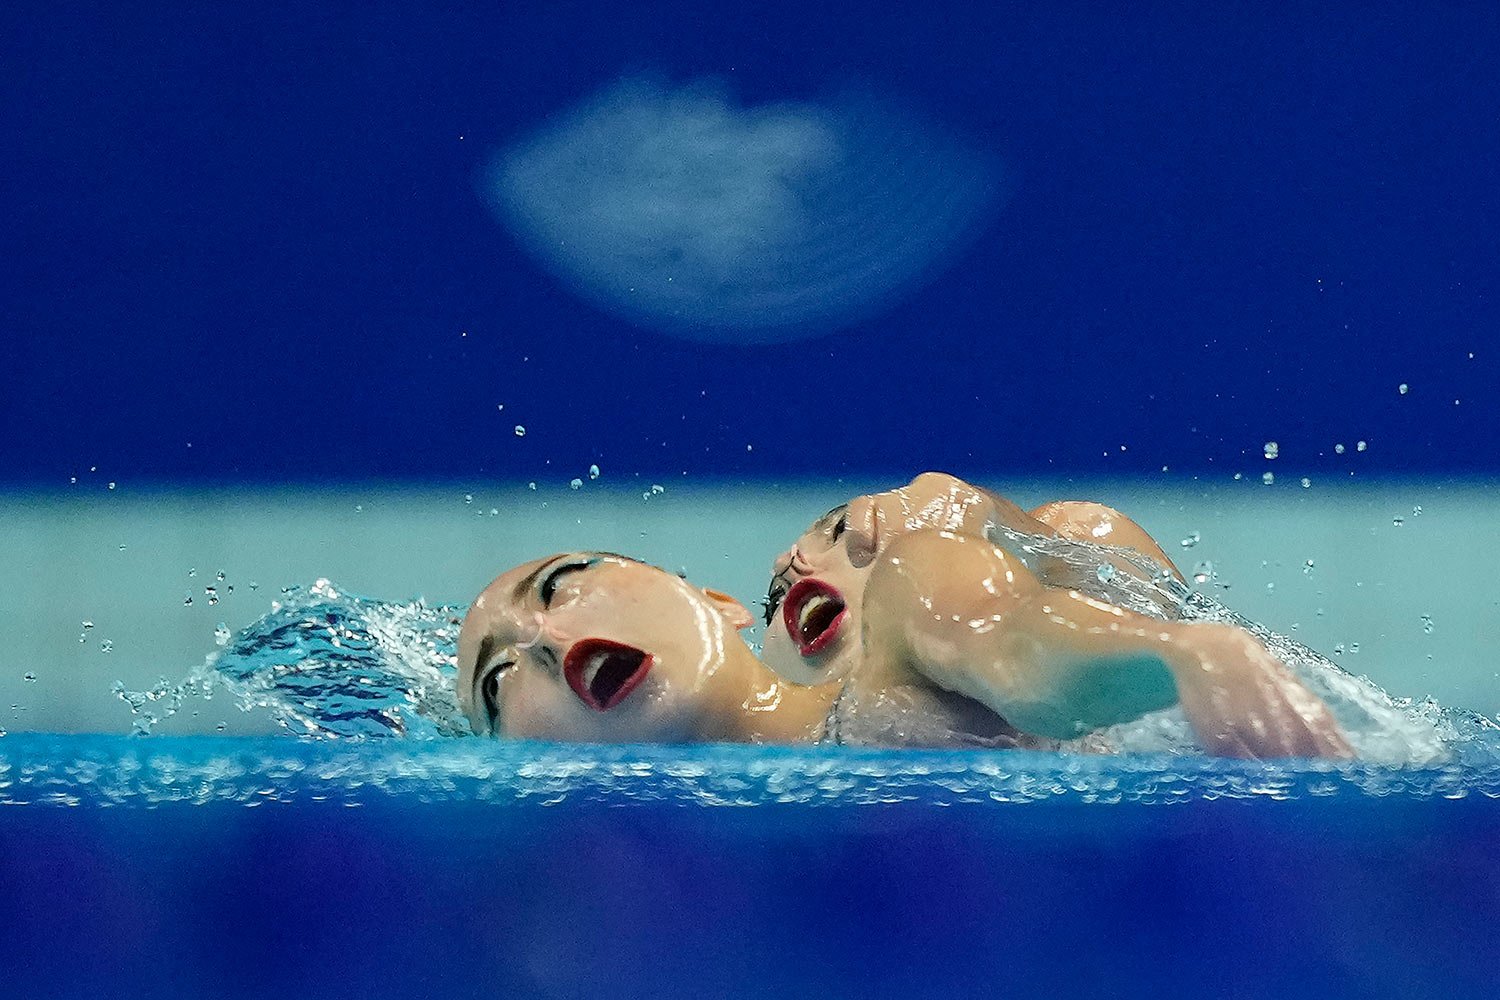  South Korea's Hur Yoonseo and Lee Riyoung take part in the Free Routine segment of the Artistic Swimming Women's Duet competition at the 19th Asian Games in Hangzhou, China, Saturday, Oct. 7, 2023. (AP Photo/Ng Han Guan) 